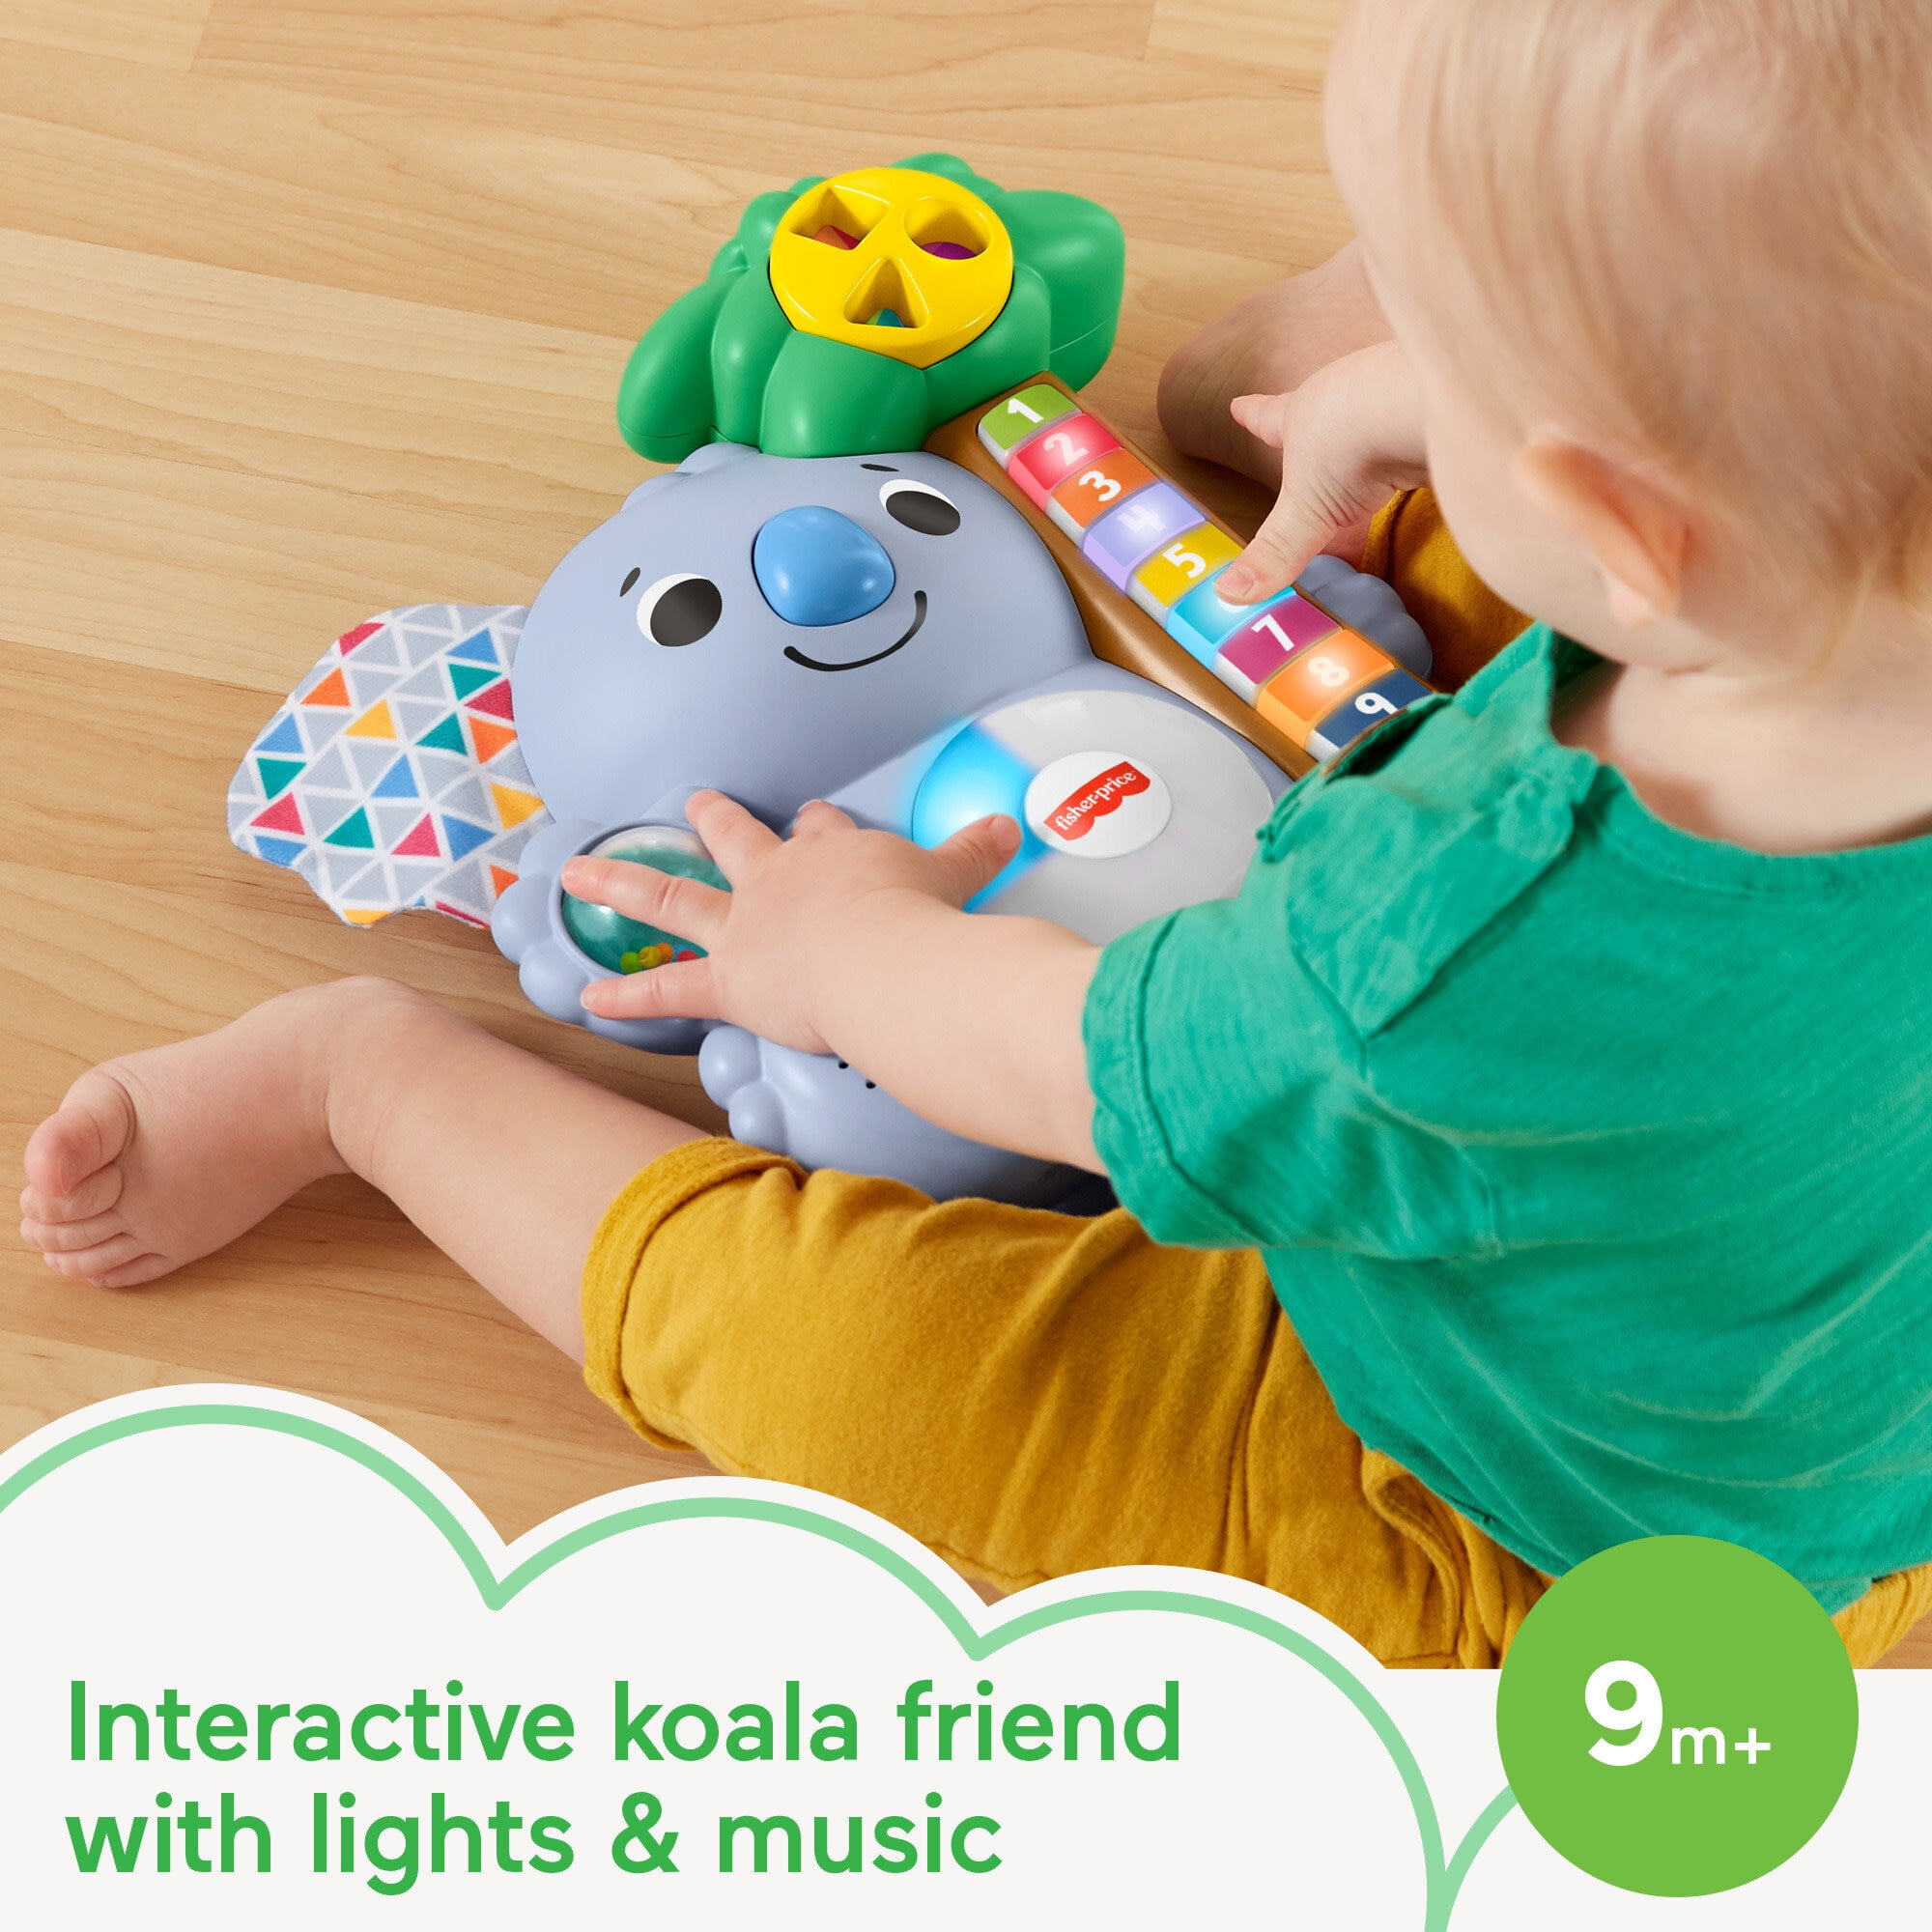 Fisher-Price Linkimals Counting Koala Musical Learning Toy 9M+